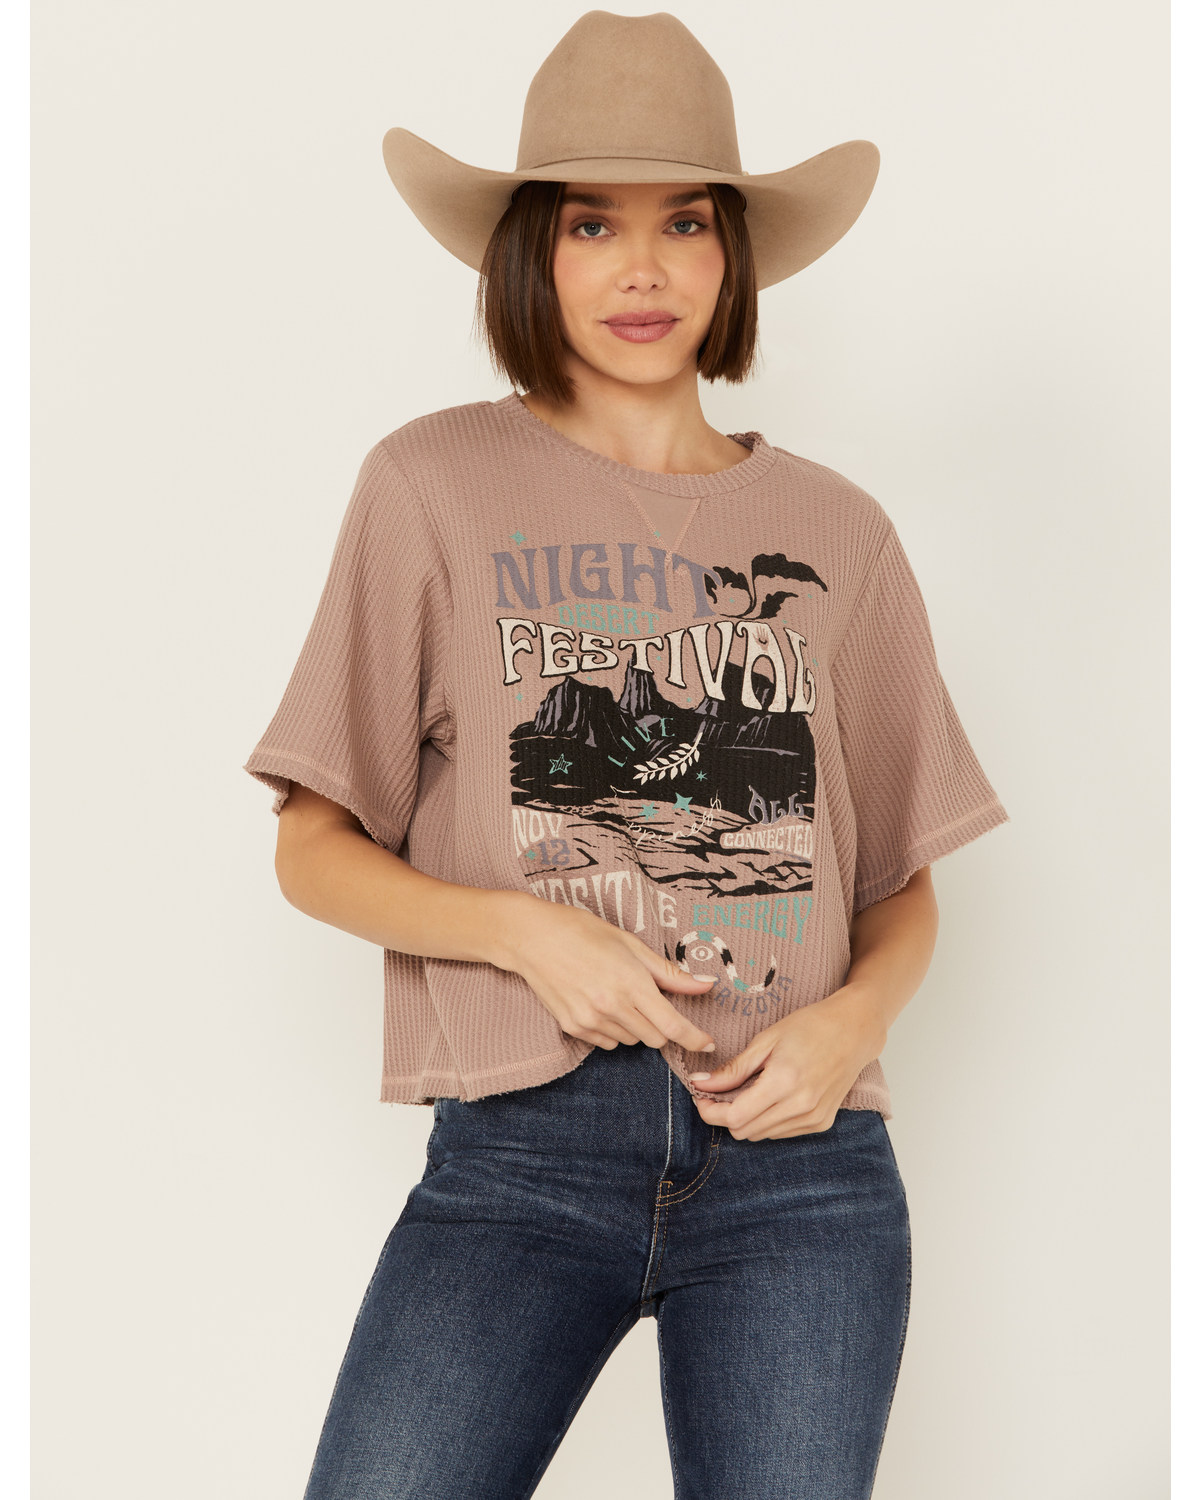 Cleo + Wolf Women's Adrian Boxy Cropped Graphic Tee